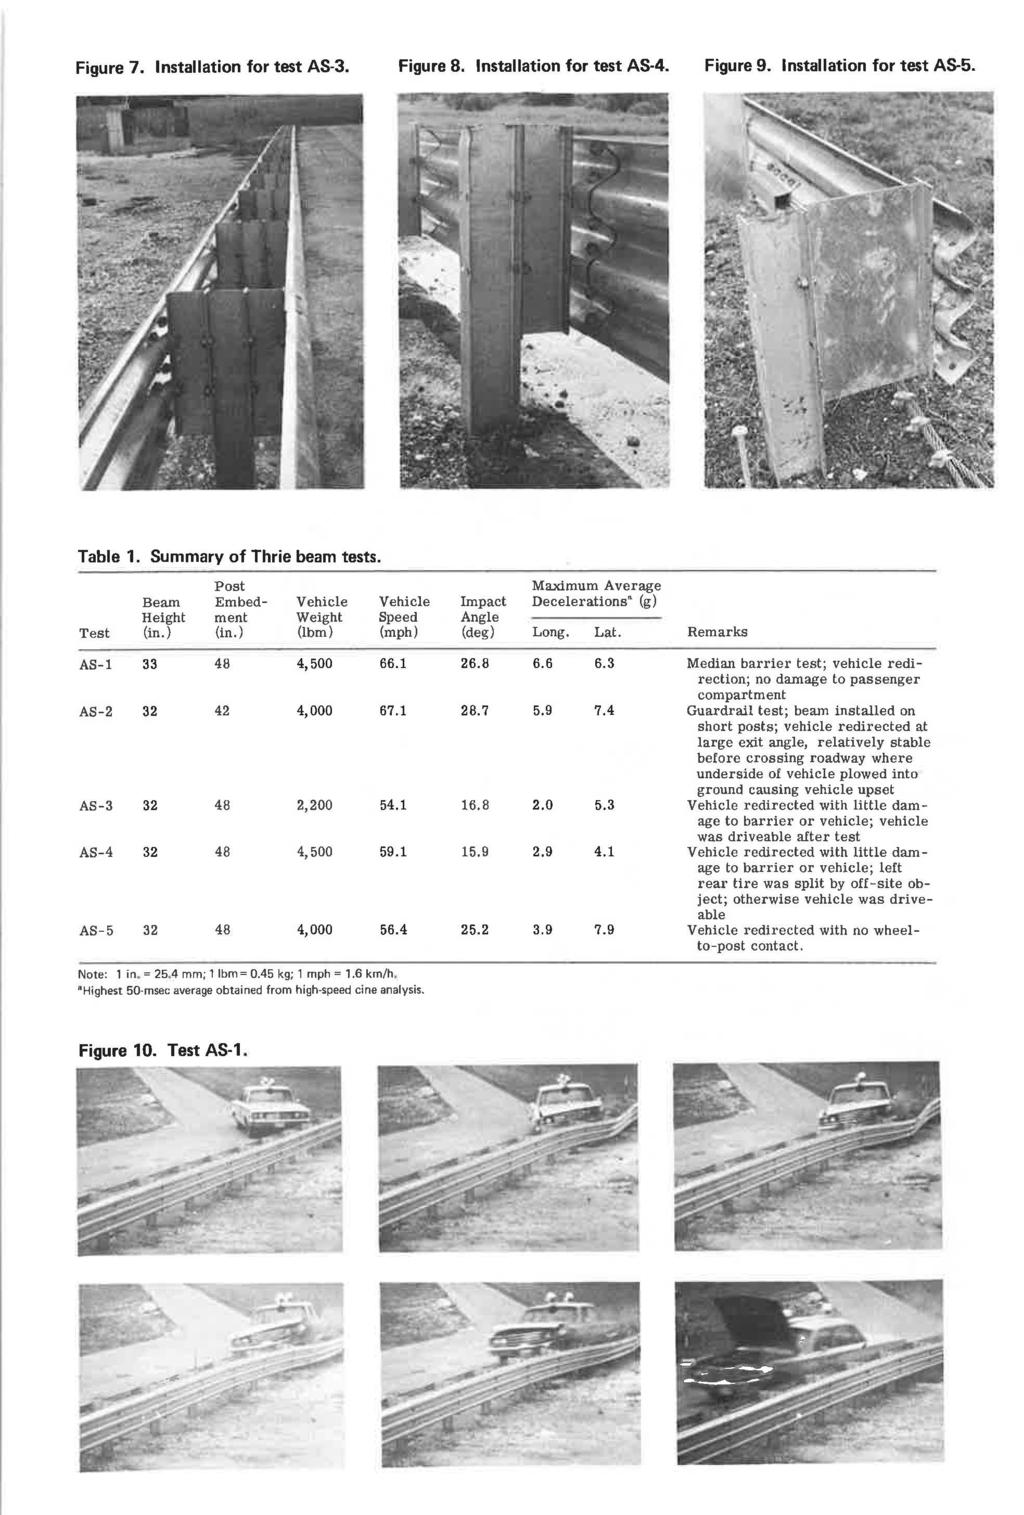 Figure 7. Installation for test AS-3. Figure 8. Installation for test AS-4. Figure 9. Installation for test AS-5. Table 1. Summary of Thrie beam tests.